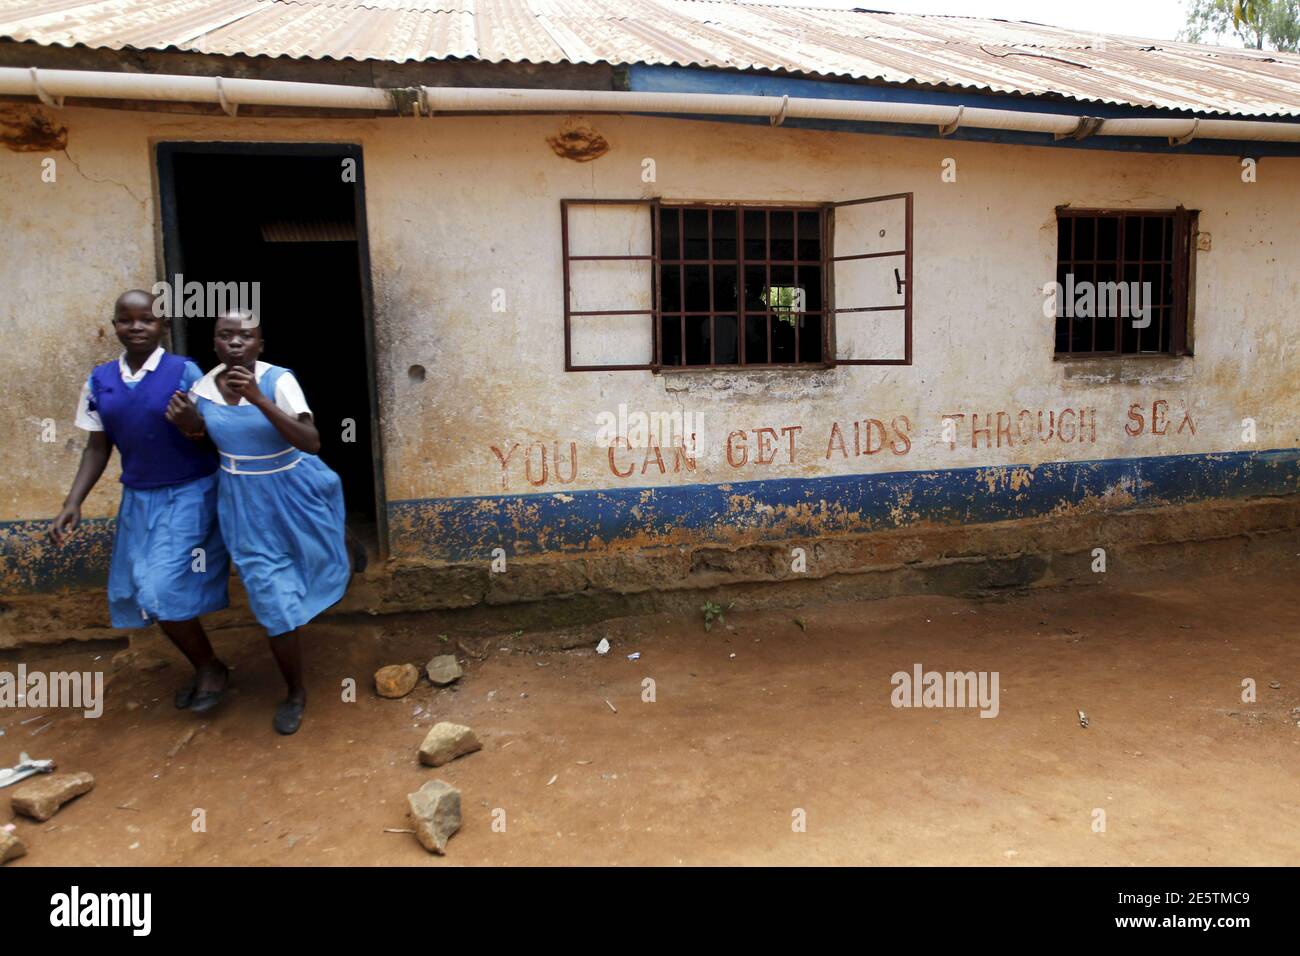 Schoolgirls run from a classroom during breaktime at the Senator Barack Obama primary school near Kogelo village west of Kenya's capital Nairobi, June 23, 2015. U.S. President Barack Obama visits Kenya and Ethiopia later this month. His ancestral home of Kogelo is home to Sarah Hussein Obama, his step-grandmother. The Kenyan village, burial place of Obama's father, features an open-pit goldmine, a pork butcher's, a school named after their most famous son and outdoor market stalls. Villagers get around by motorbike taxi or on foot while a donkey-cart transports water. Children, some of them na Stock Photo